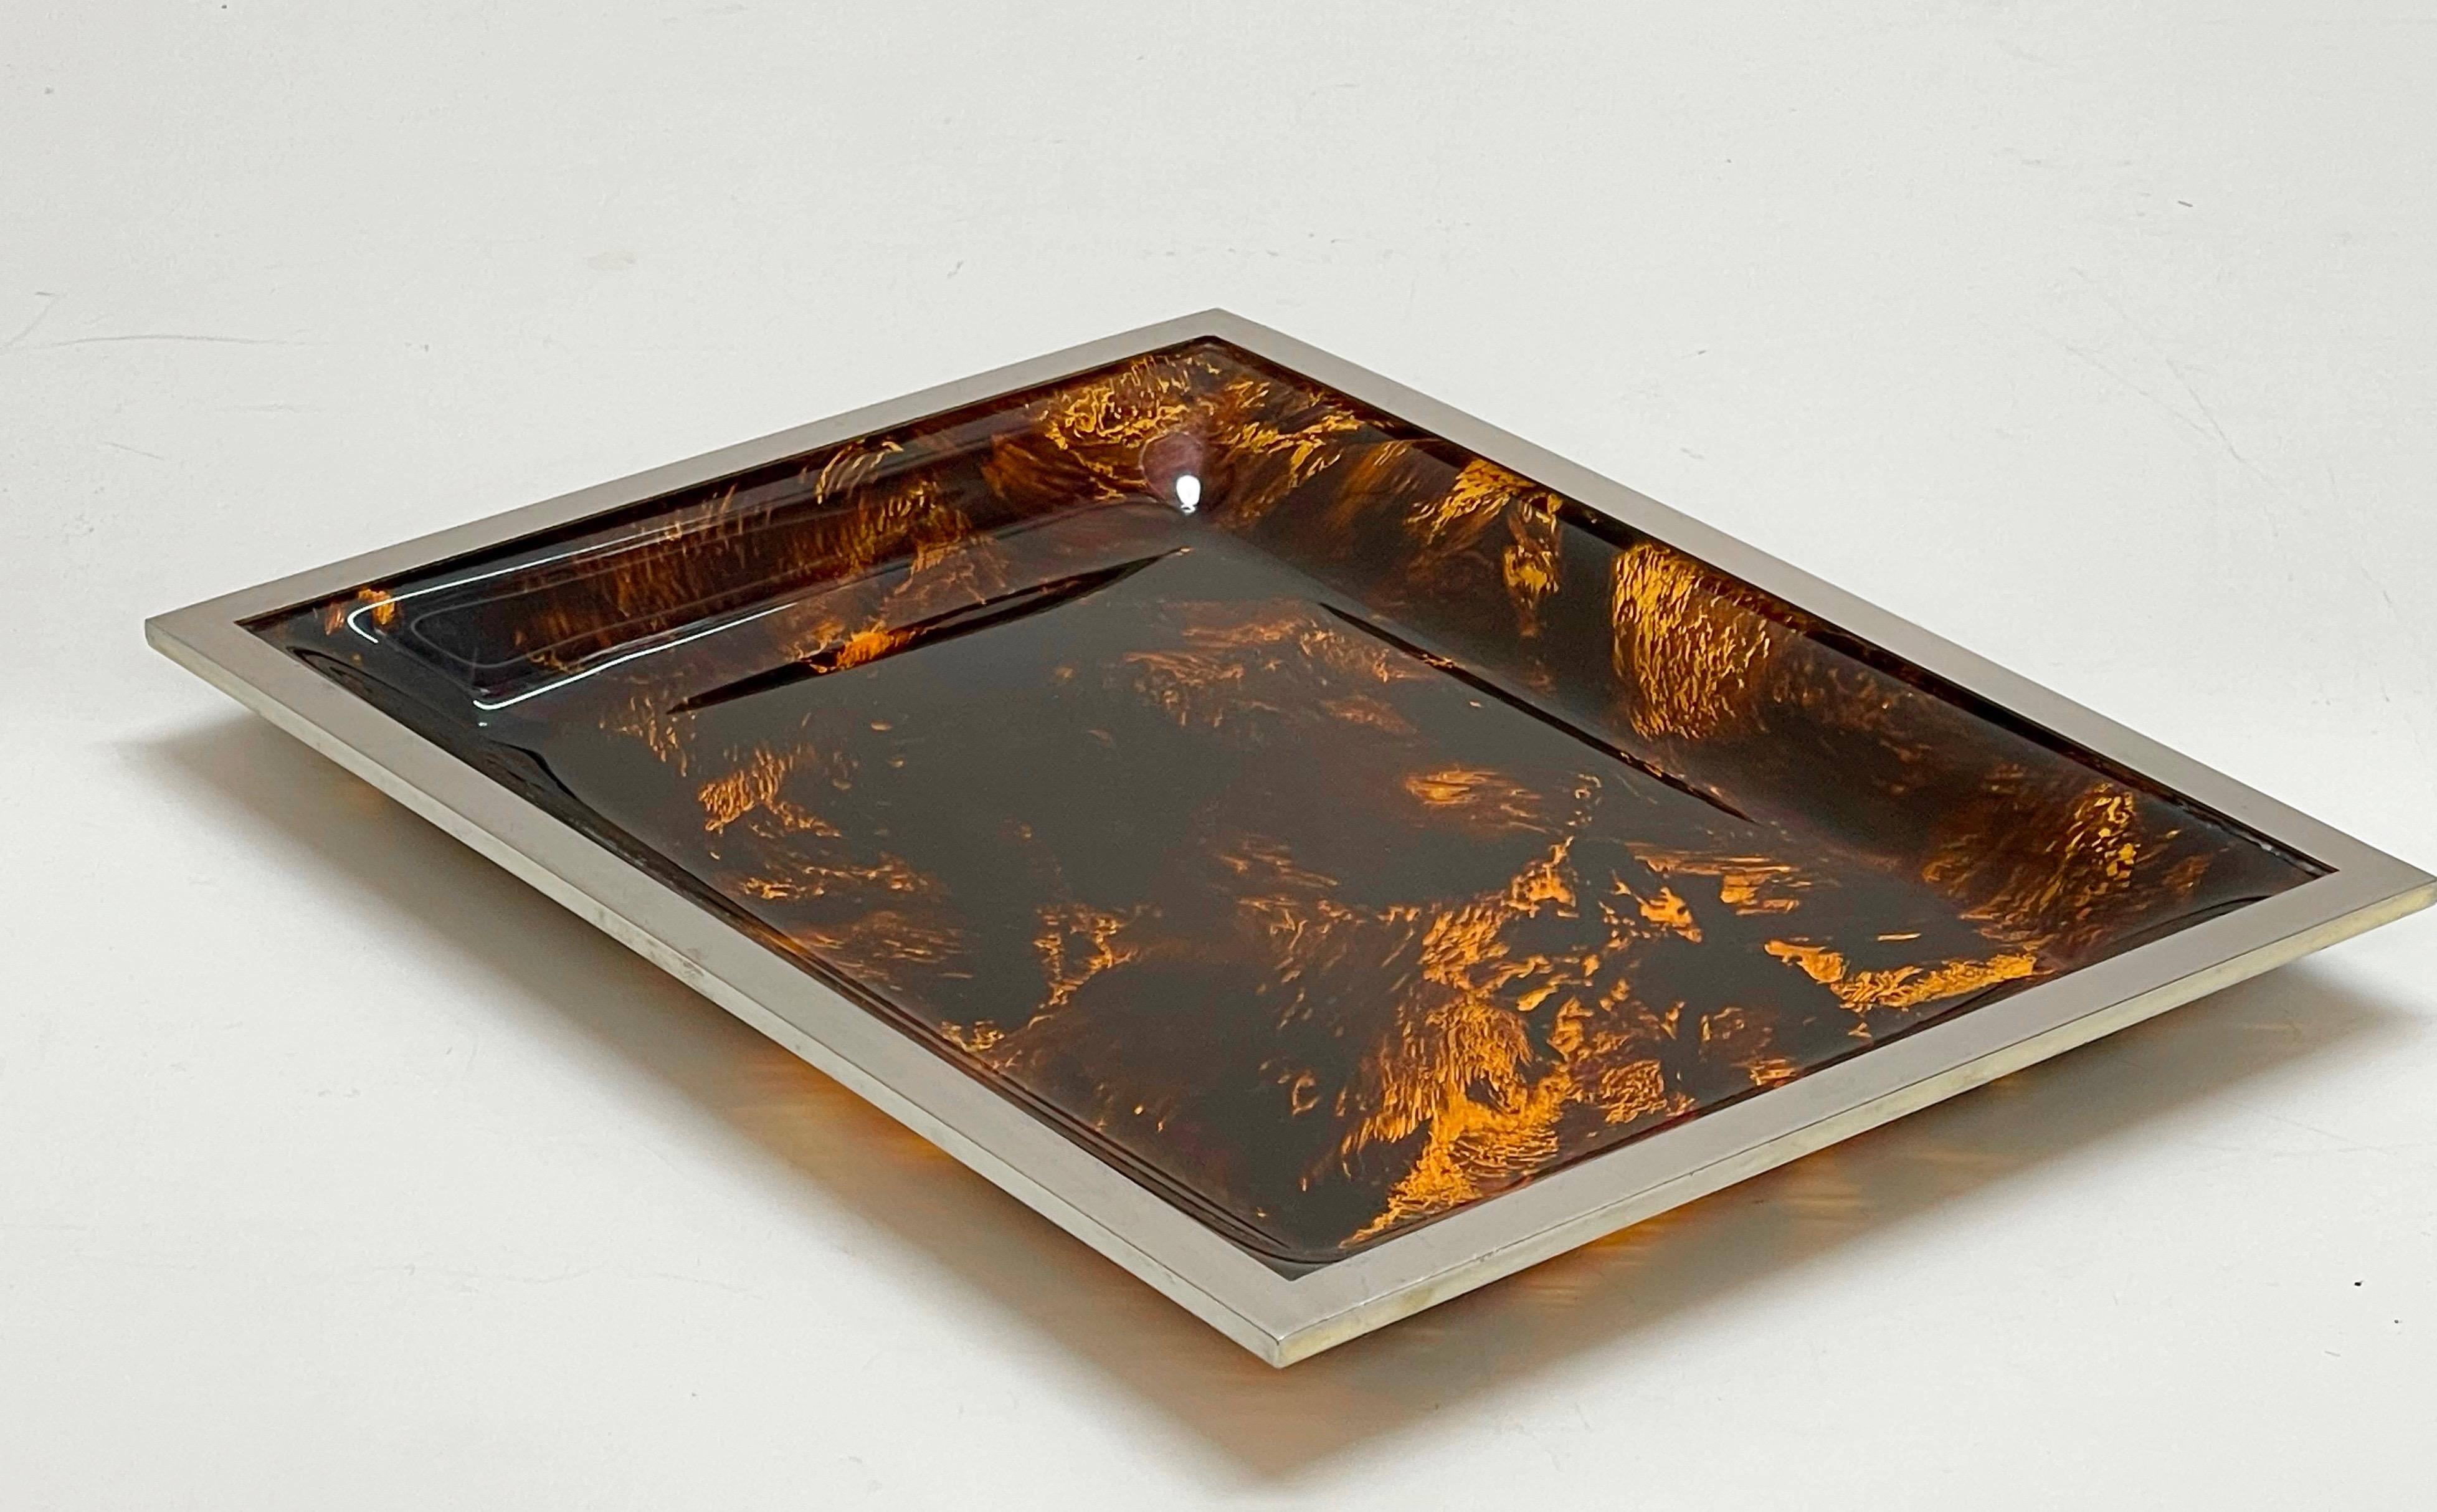 Midcentury Tortoiseshell Plexiglass Italian Serving Tray after Willy Rizzo 1970s For Sale 5